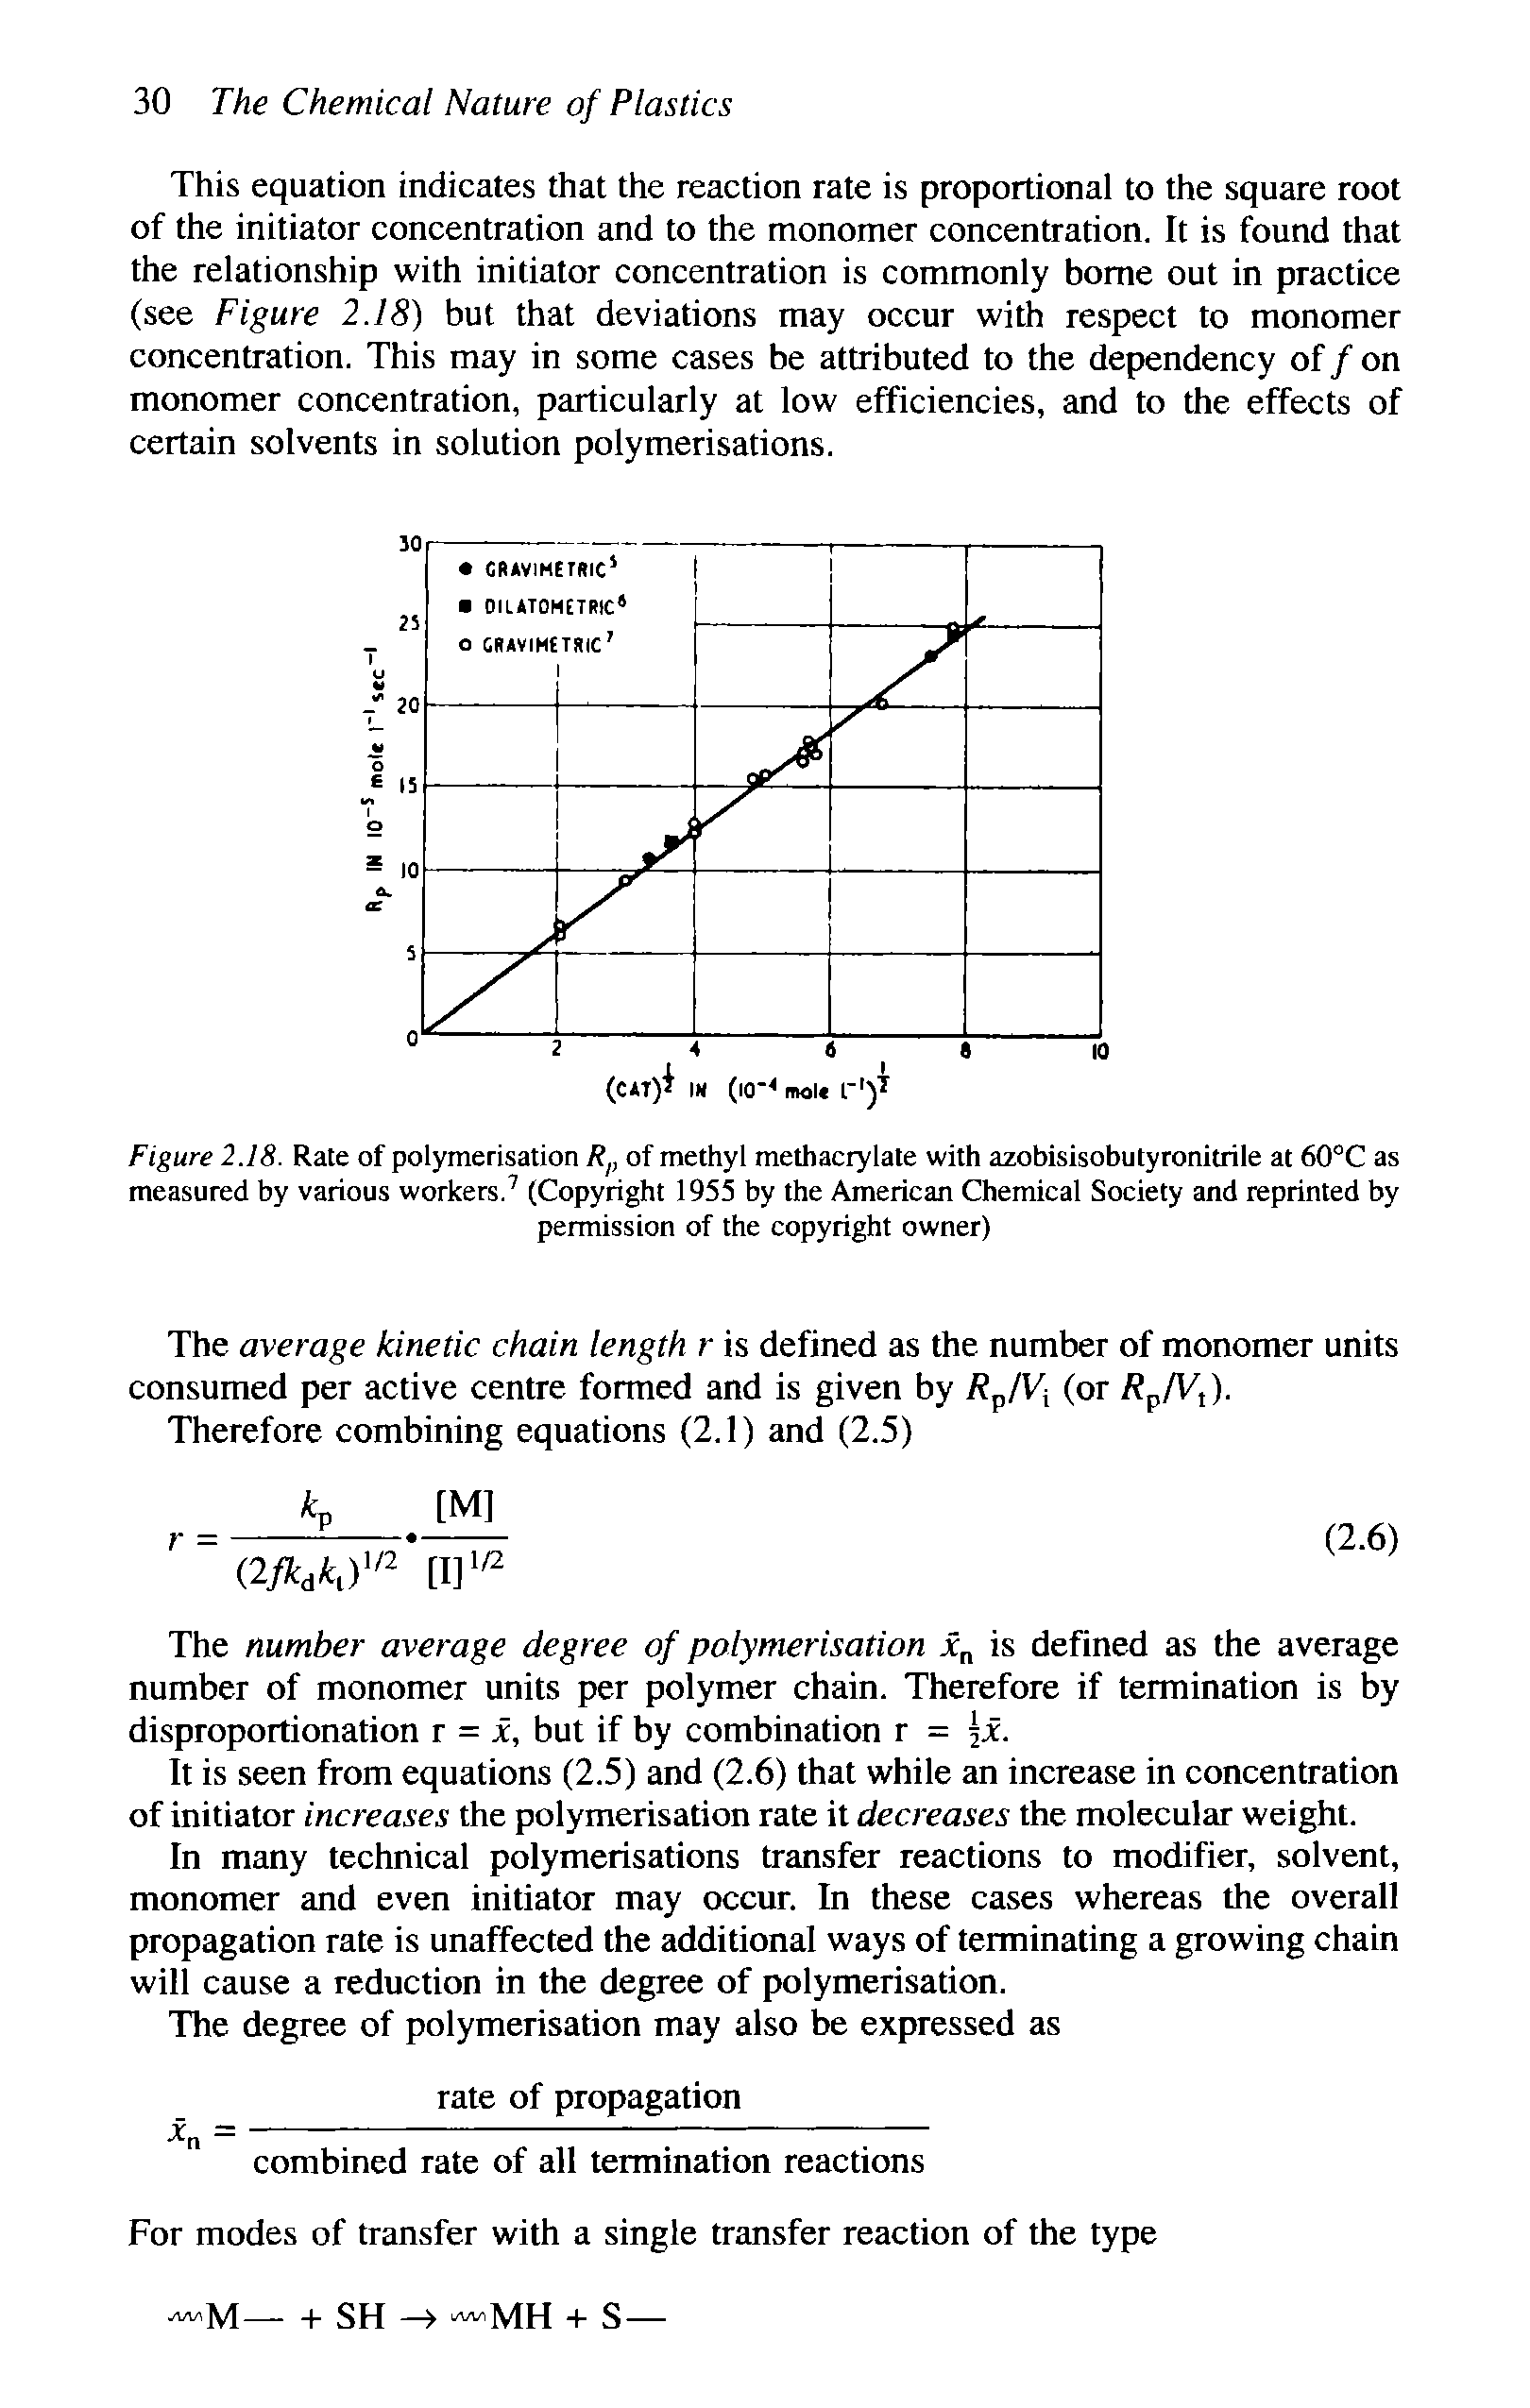 Figure 2.18. Rate of polymerisation of methyl methacrylate with azobisisobutyronitrile at 60°C as measured by various workers. (Copyright 1955 by the American Chemical Society and reprinted by permission of the copyright owner)...